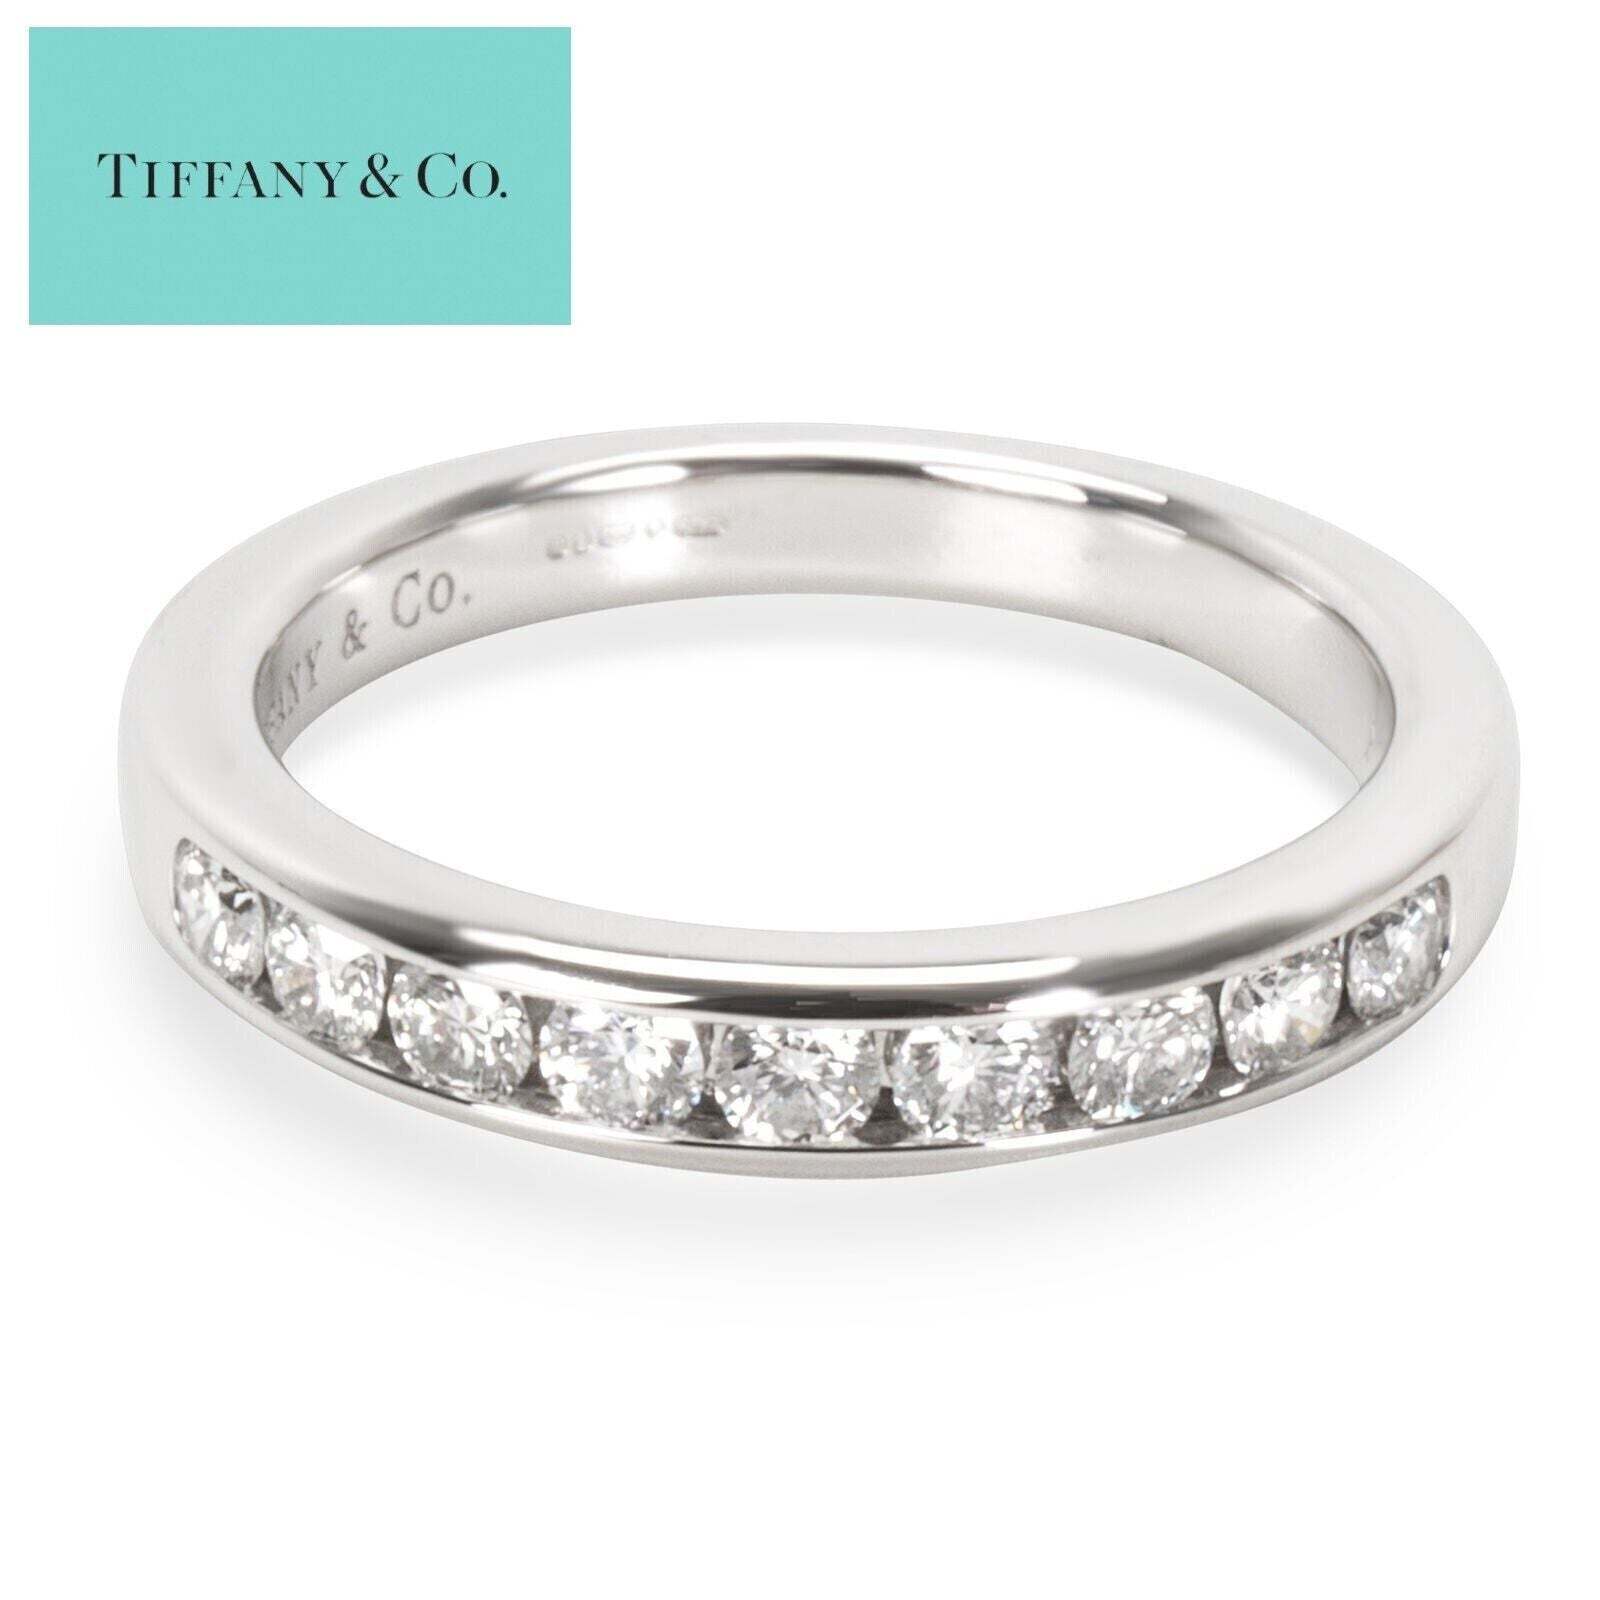 Primary image for Tiffany & Co. Platinum Shared Channel Set .24ct Diamond Wedding Band Ring 6